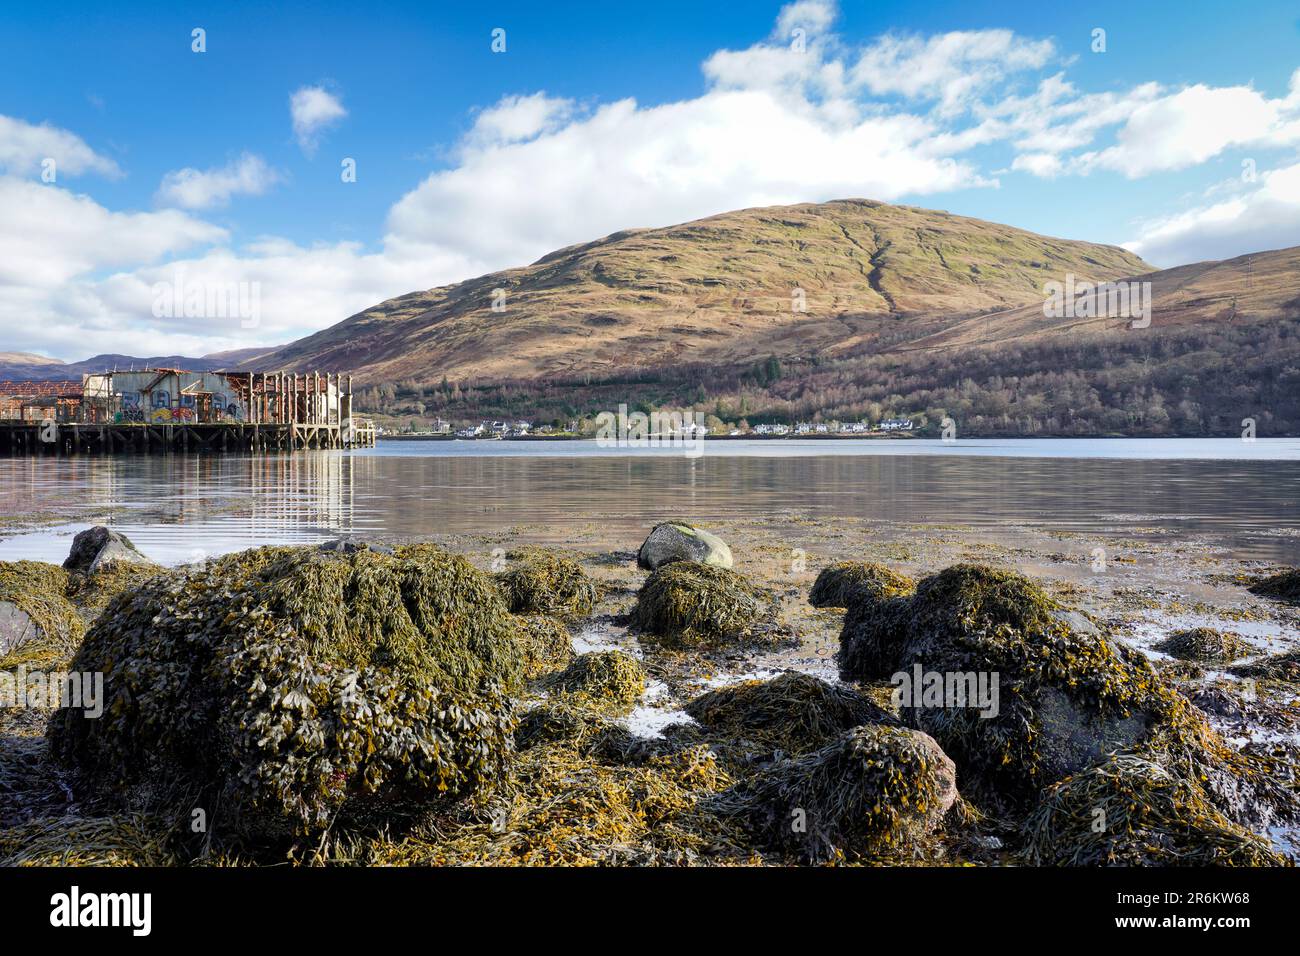 Distant view of the village of Arrochar, Loch Long, Argyll and Bute, Scotland, United Kingdom, Europe Stock Photo